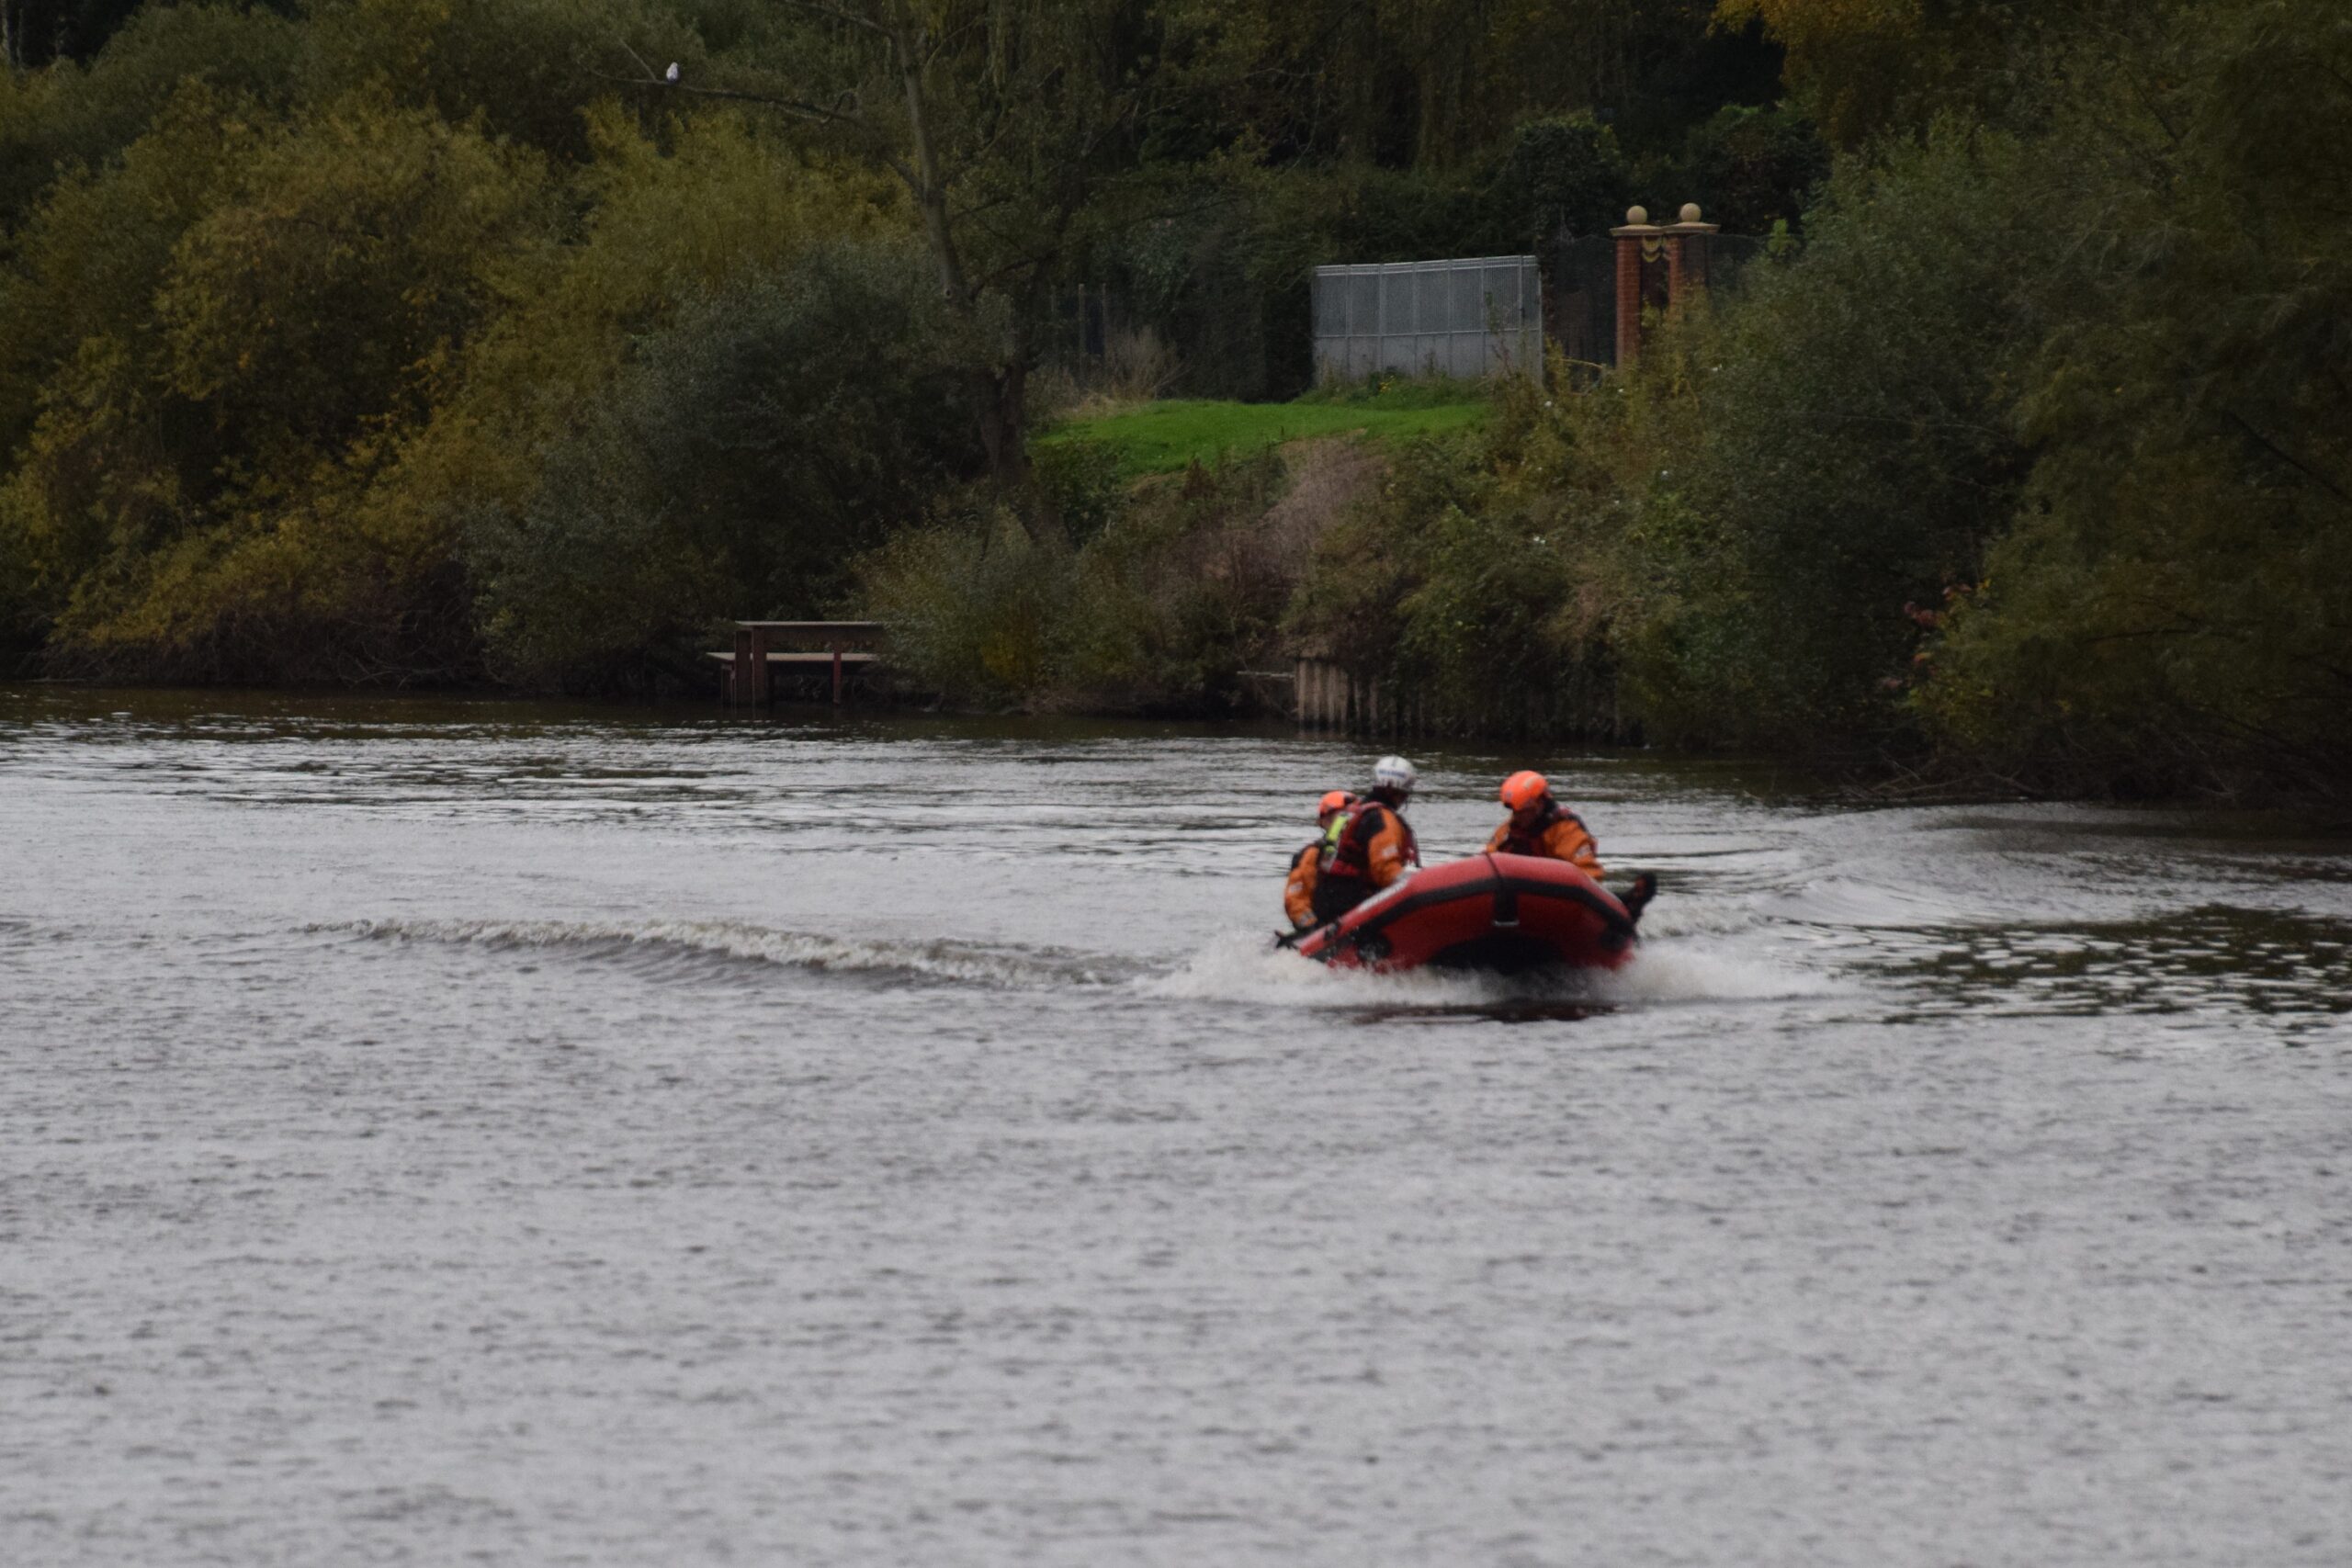 Crews ferry occupants of stranded narrowboat to safety from river